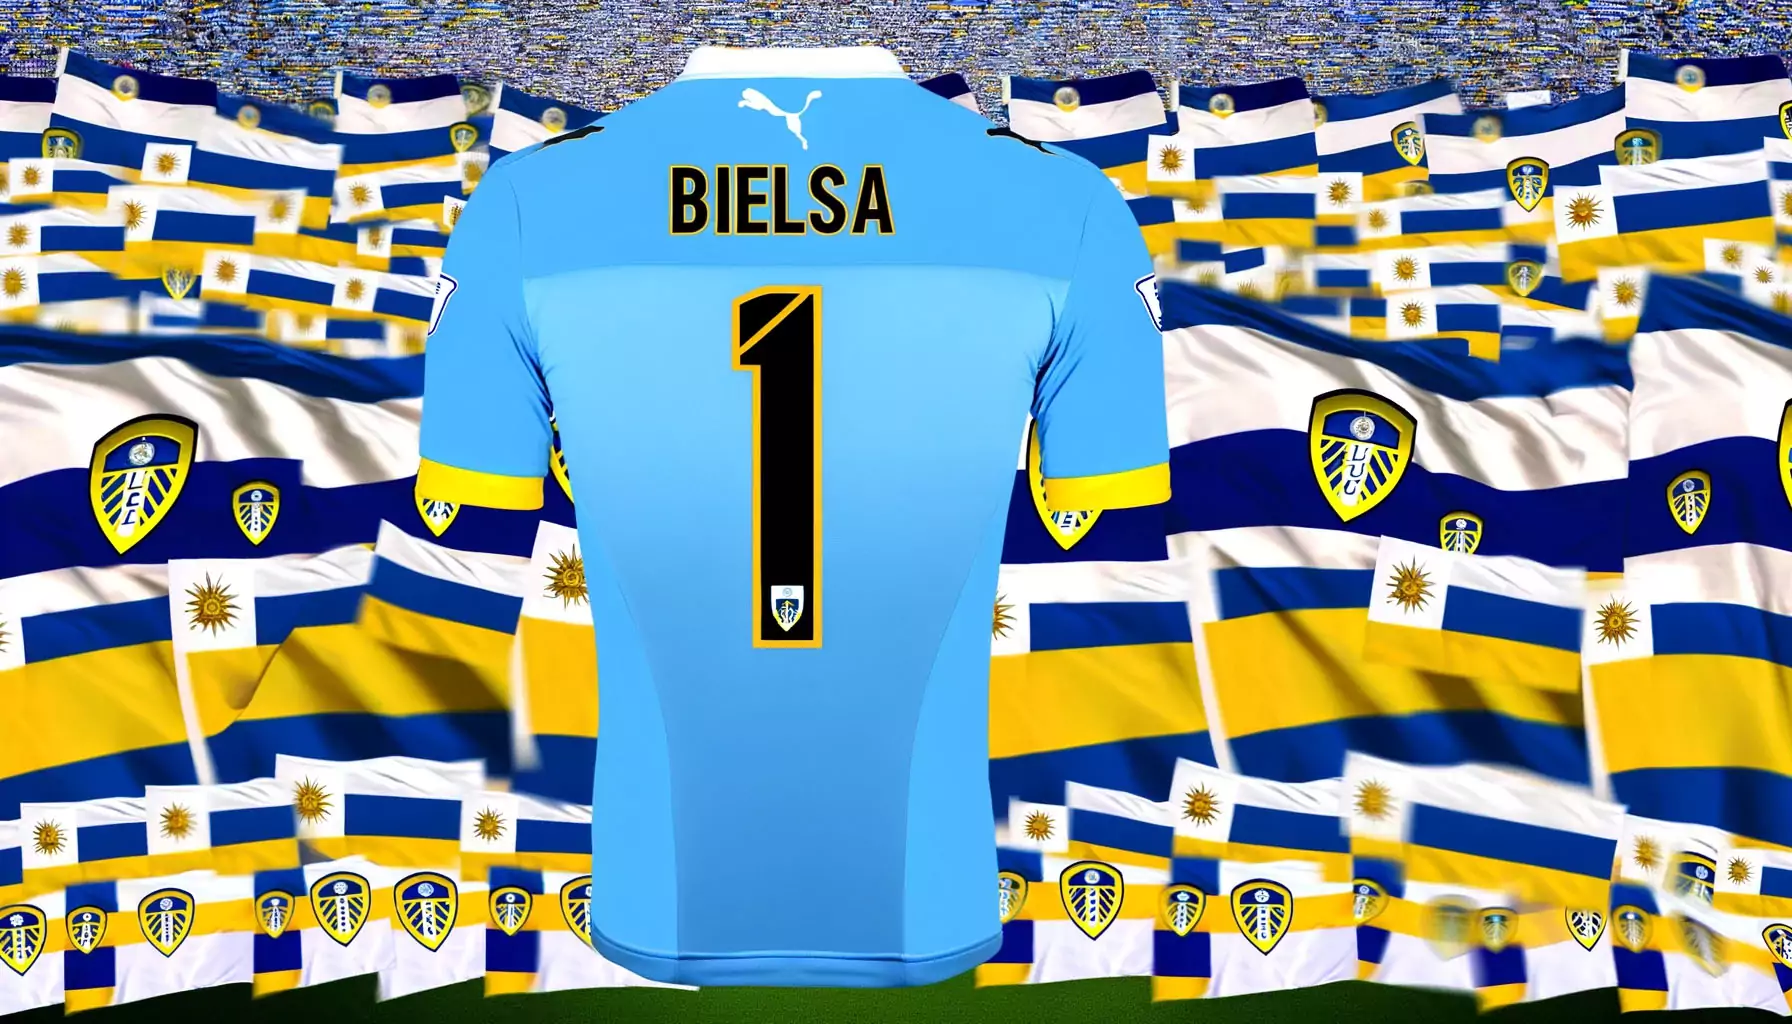 Uruguay shirt with 'Bielsa' is set against a wider backdrop of Leeds United flags